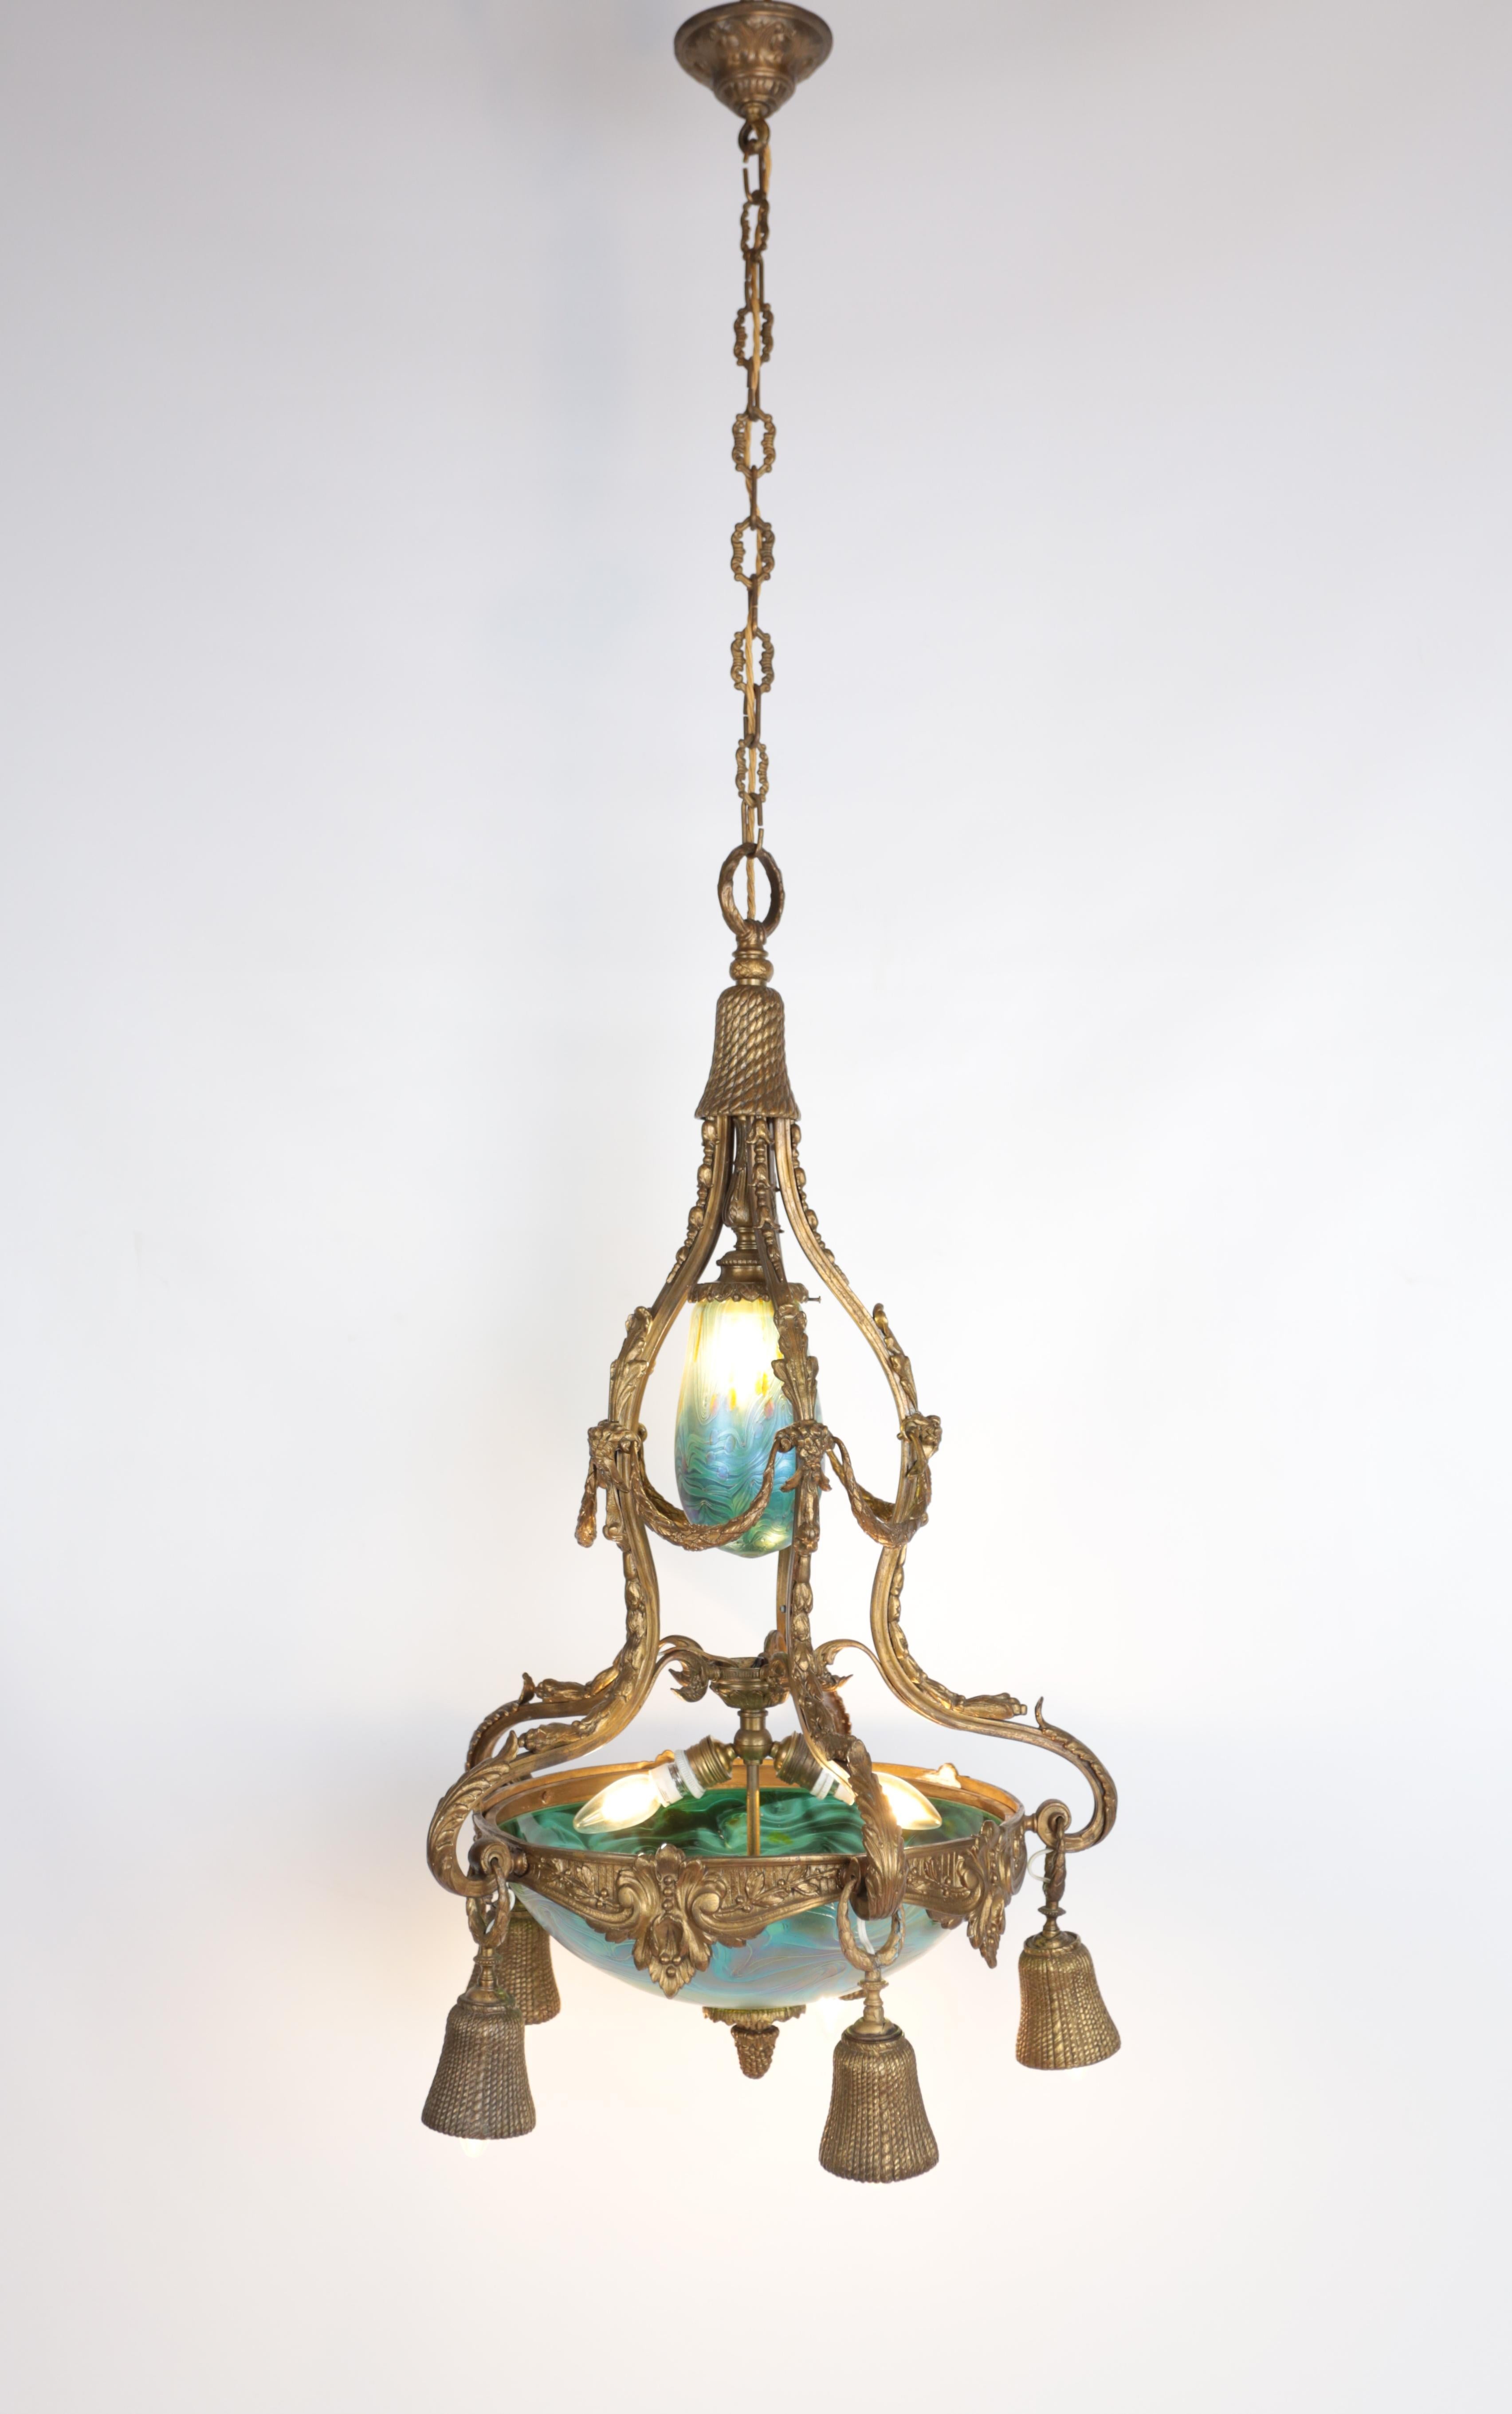 Art Nouveau bronze chandelier with iridescent glass shades For Sale 1